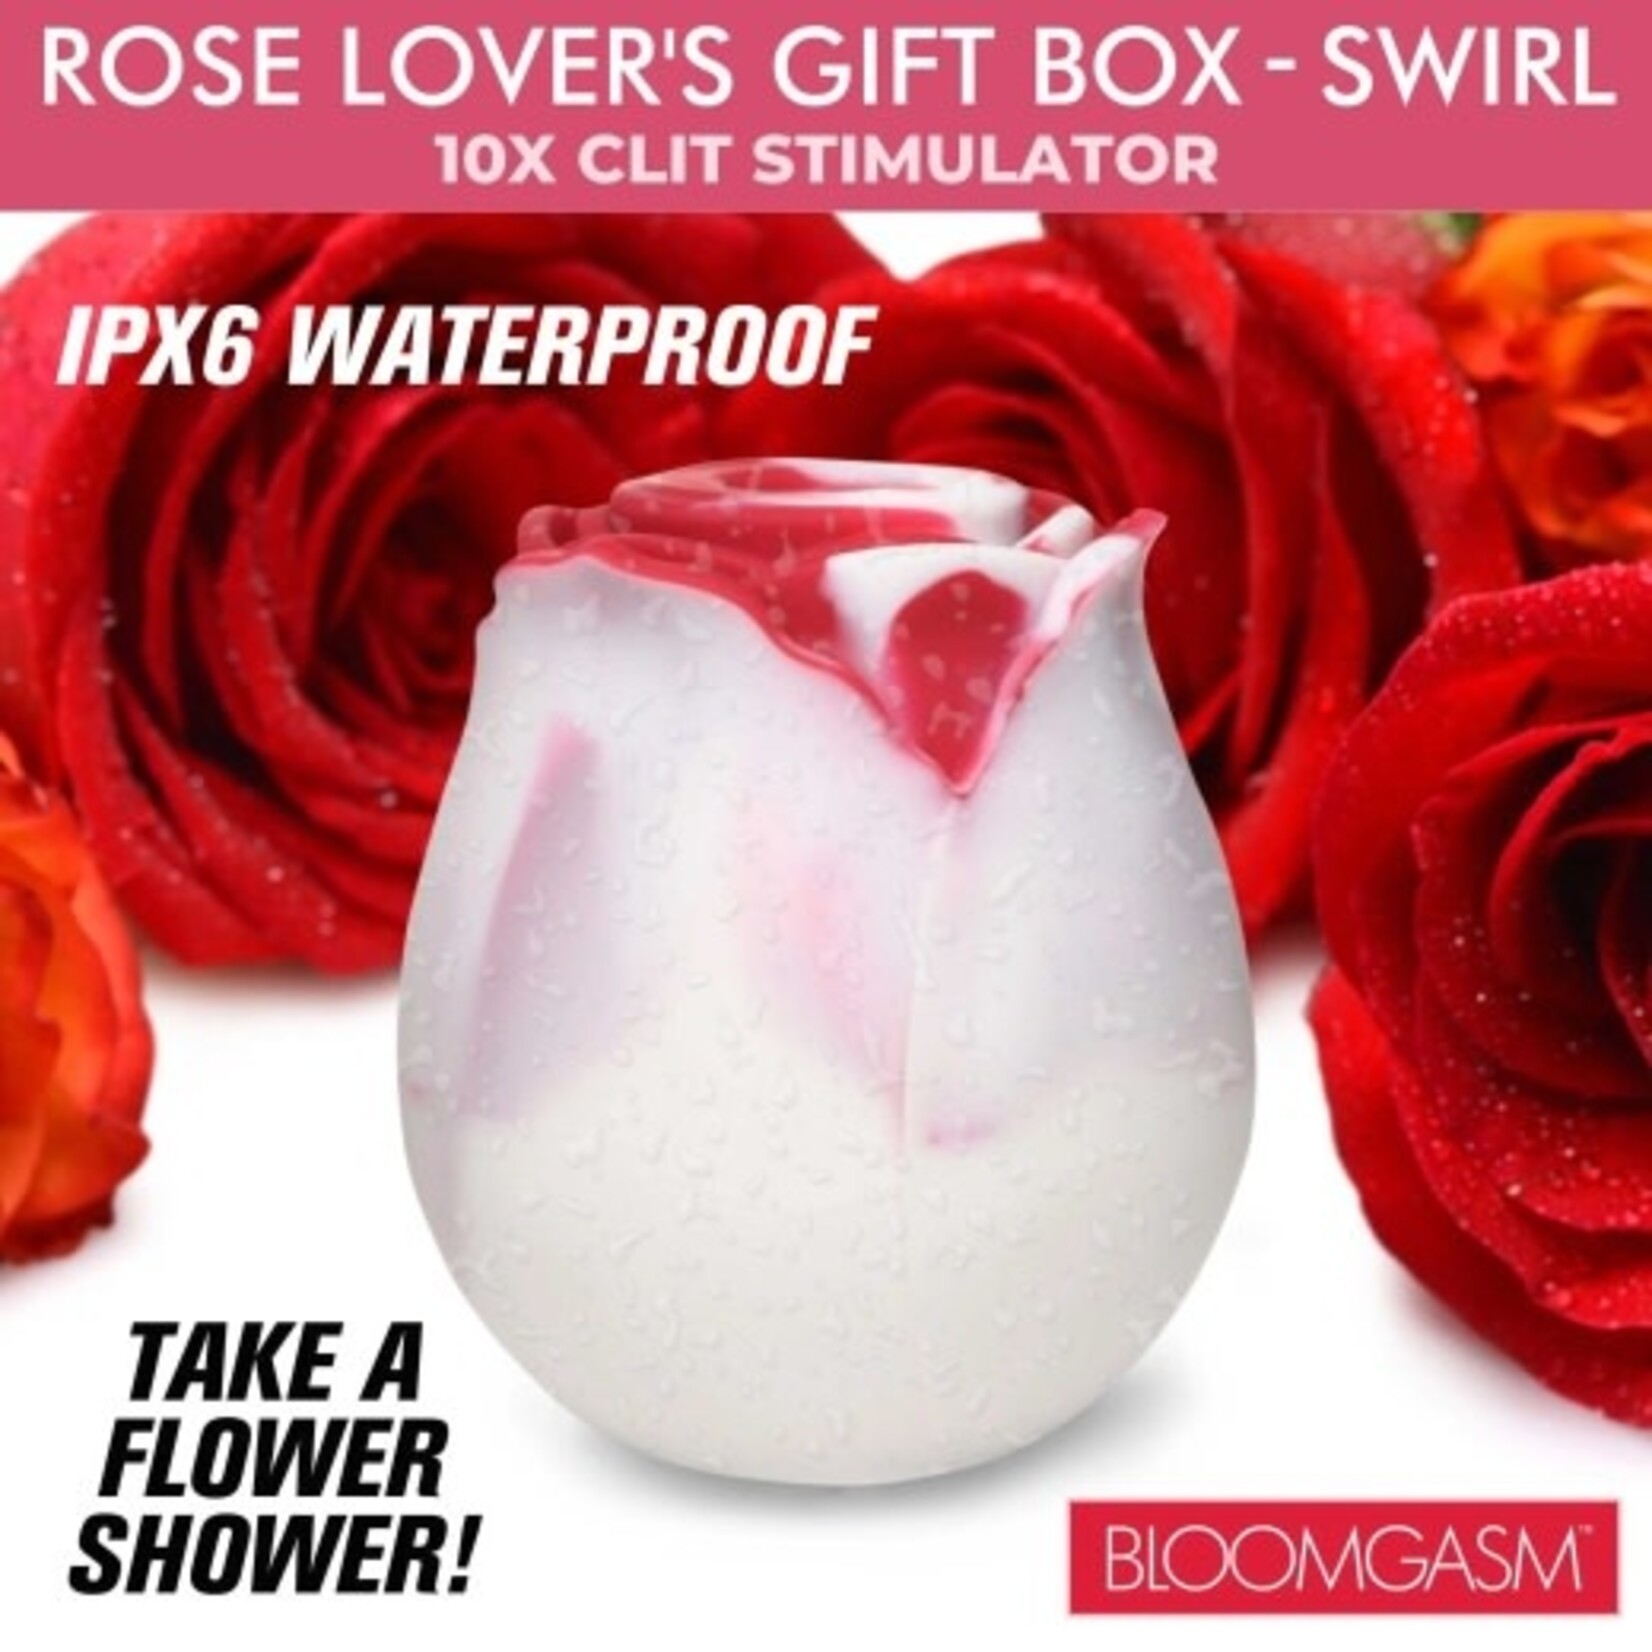 BLOOMGASM THE ROSE LOVER'S GIFT BOX - SWIRL